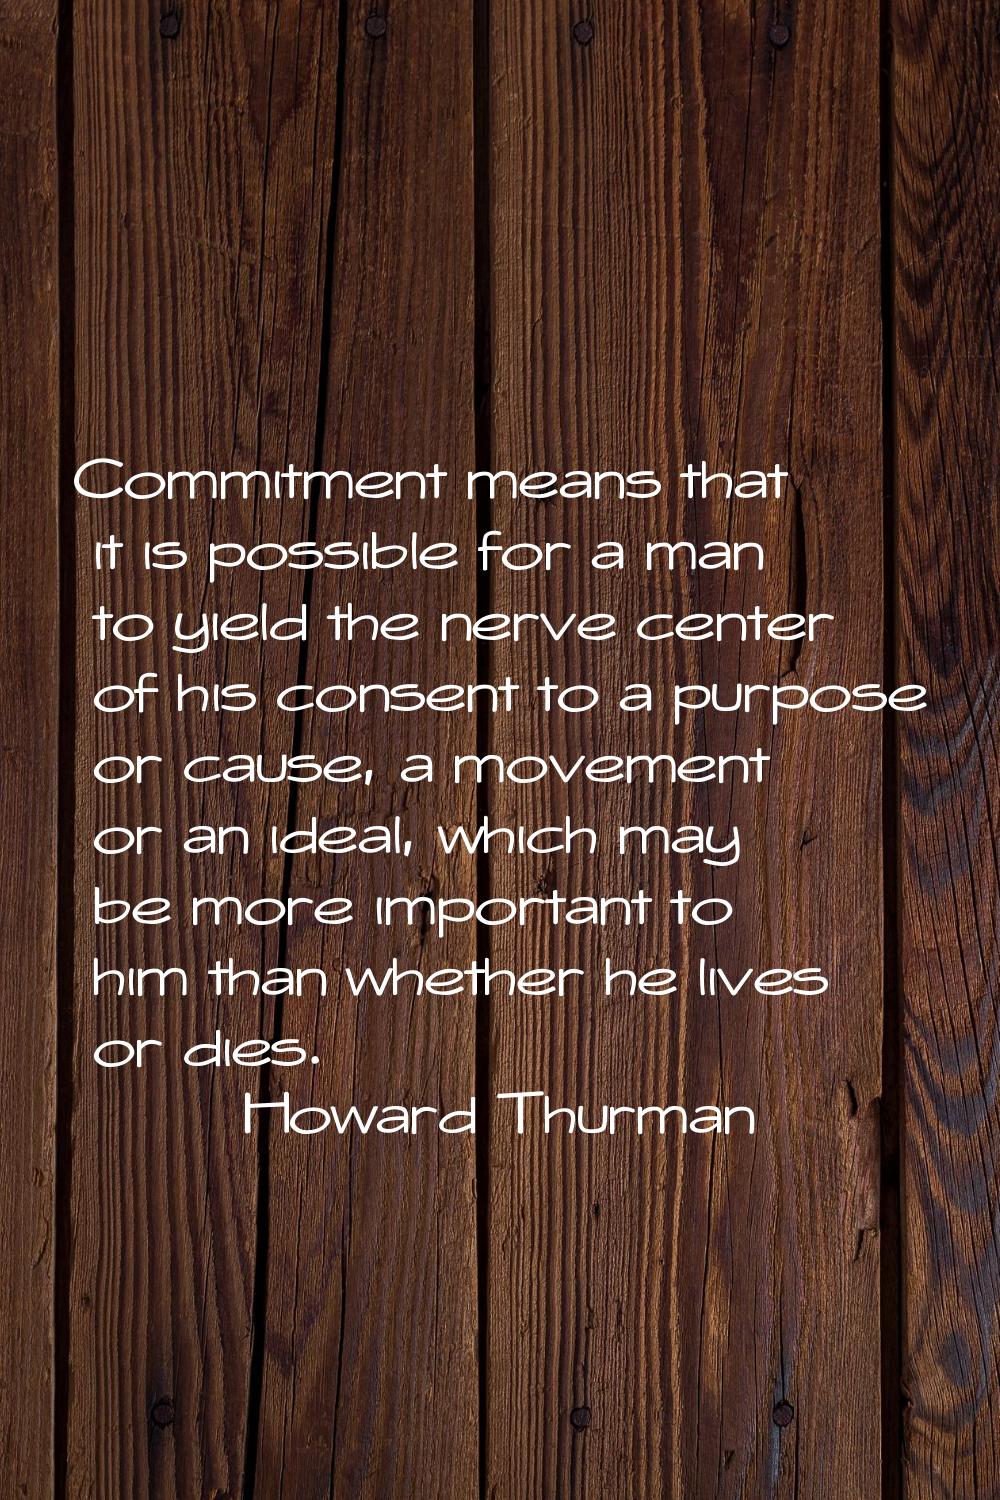 Commitment means that it is possible for a man to yield the nerve center of his consent to a purpos